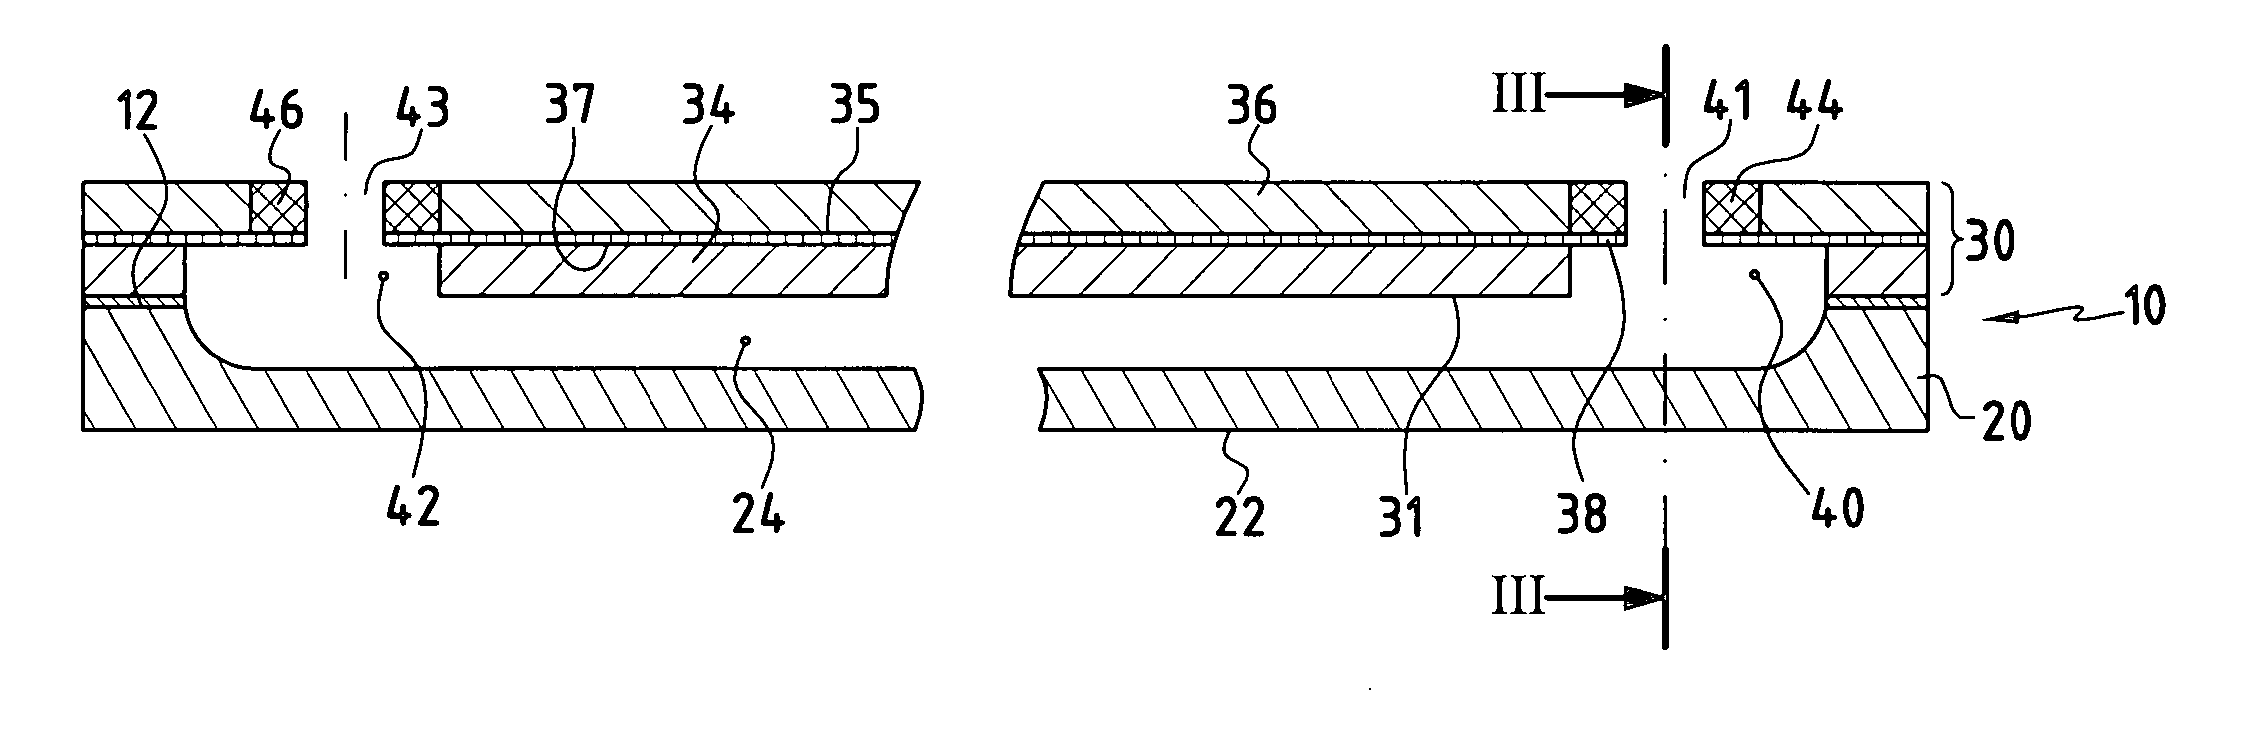 Active cooling panel of thermostructural composite material and method for its manufacture